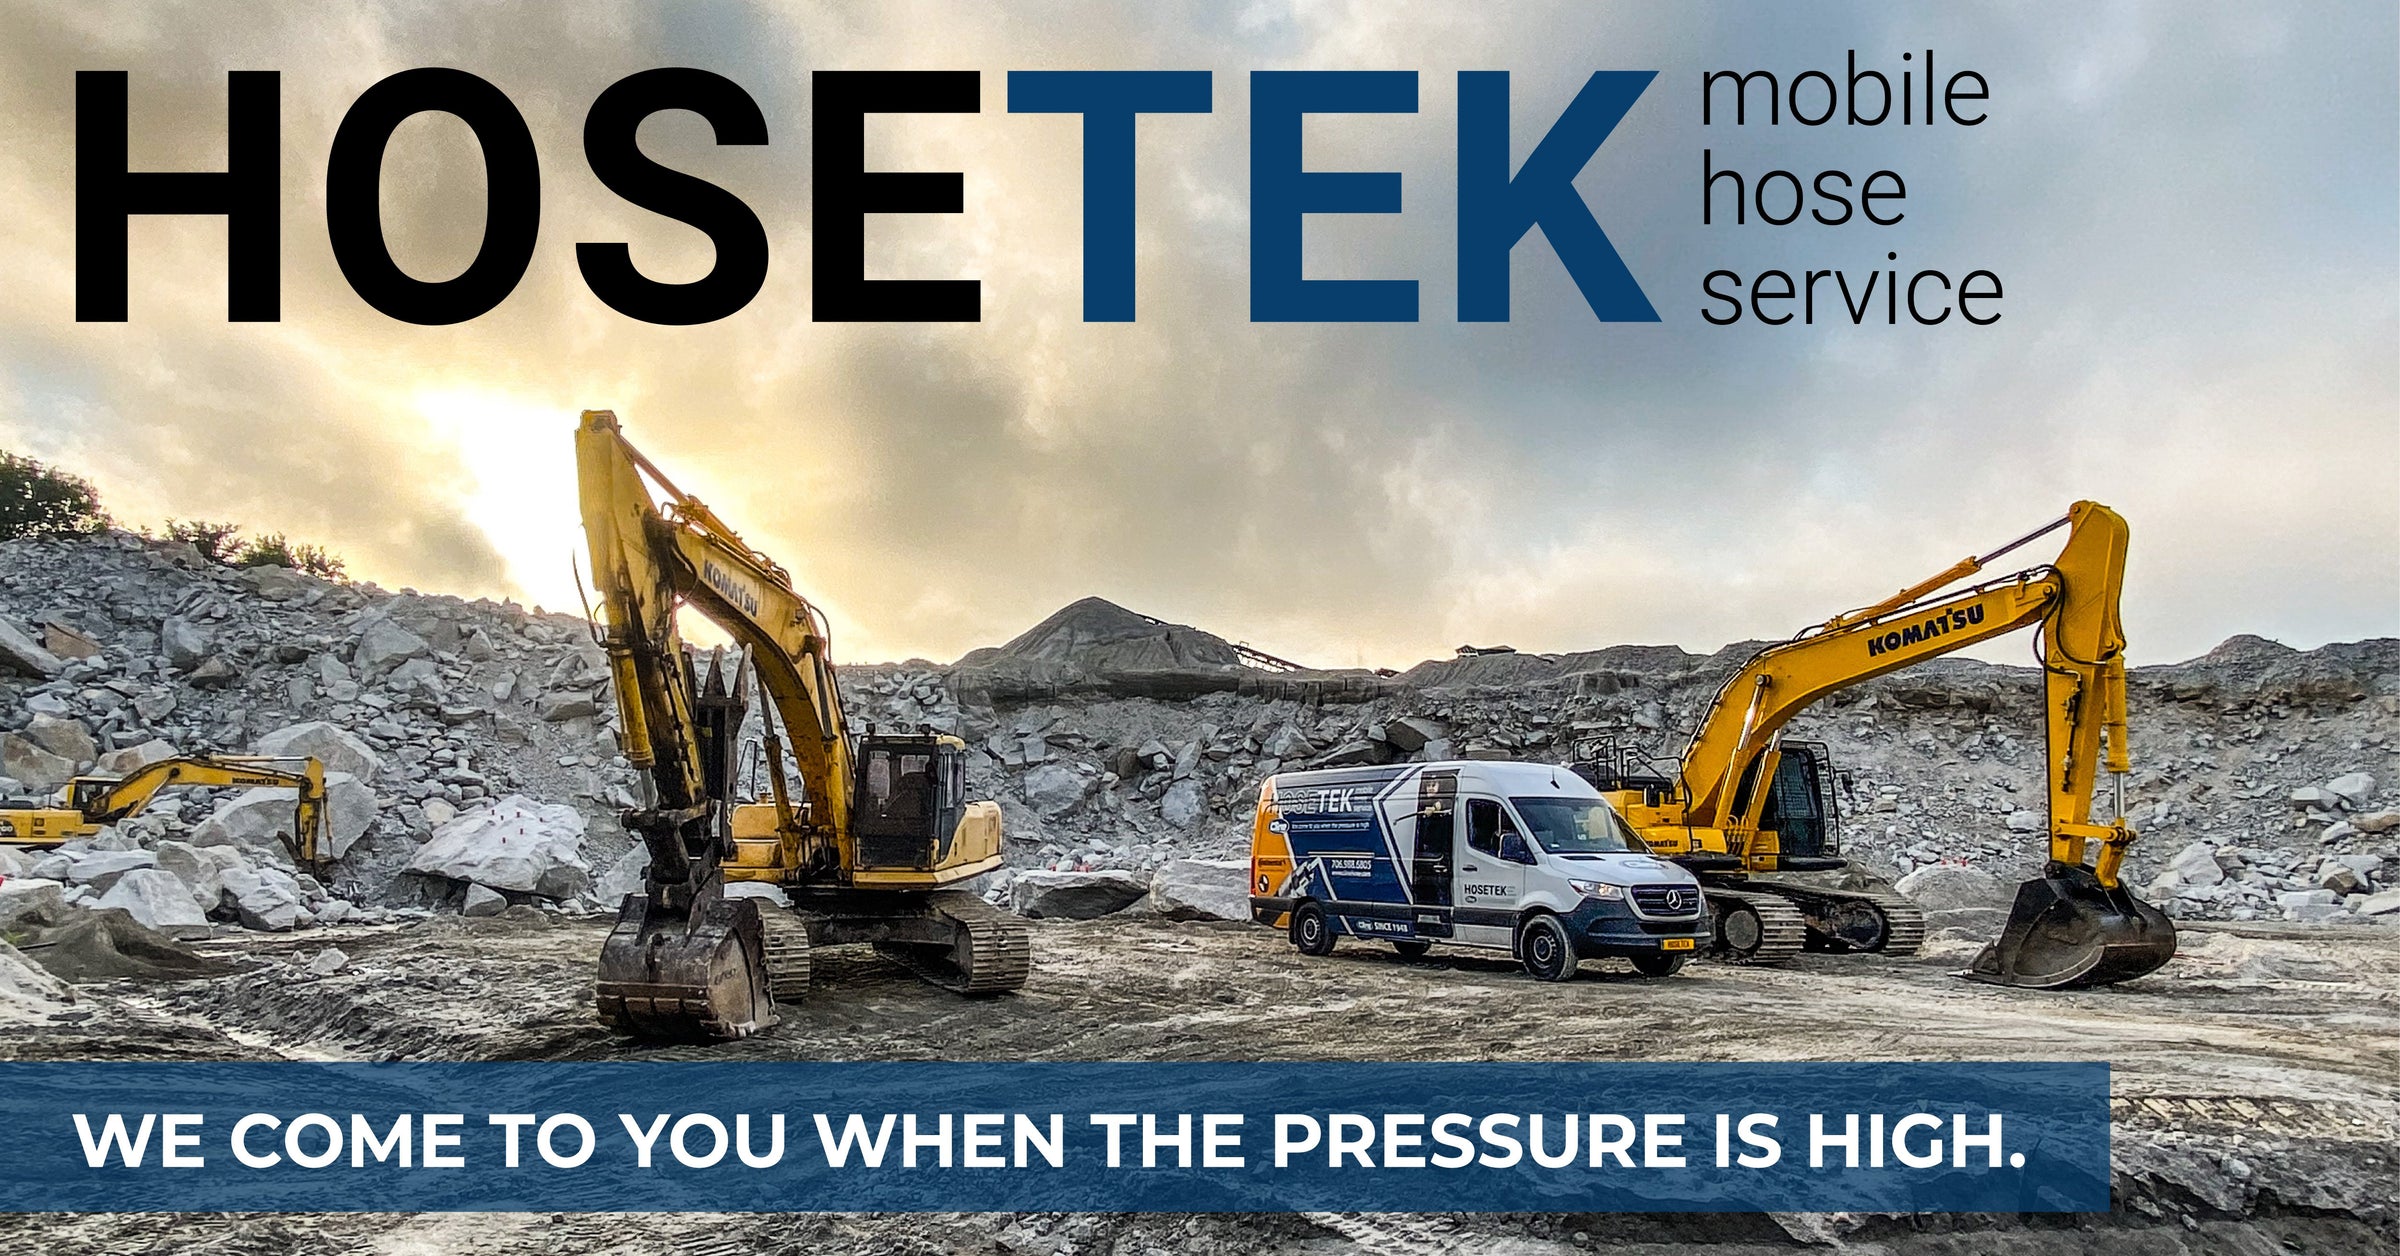 HoseTek - We come to you when the pressure is high.